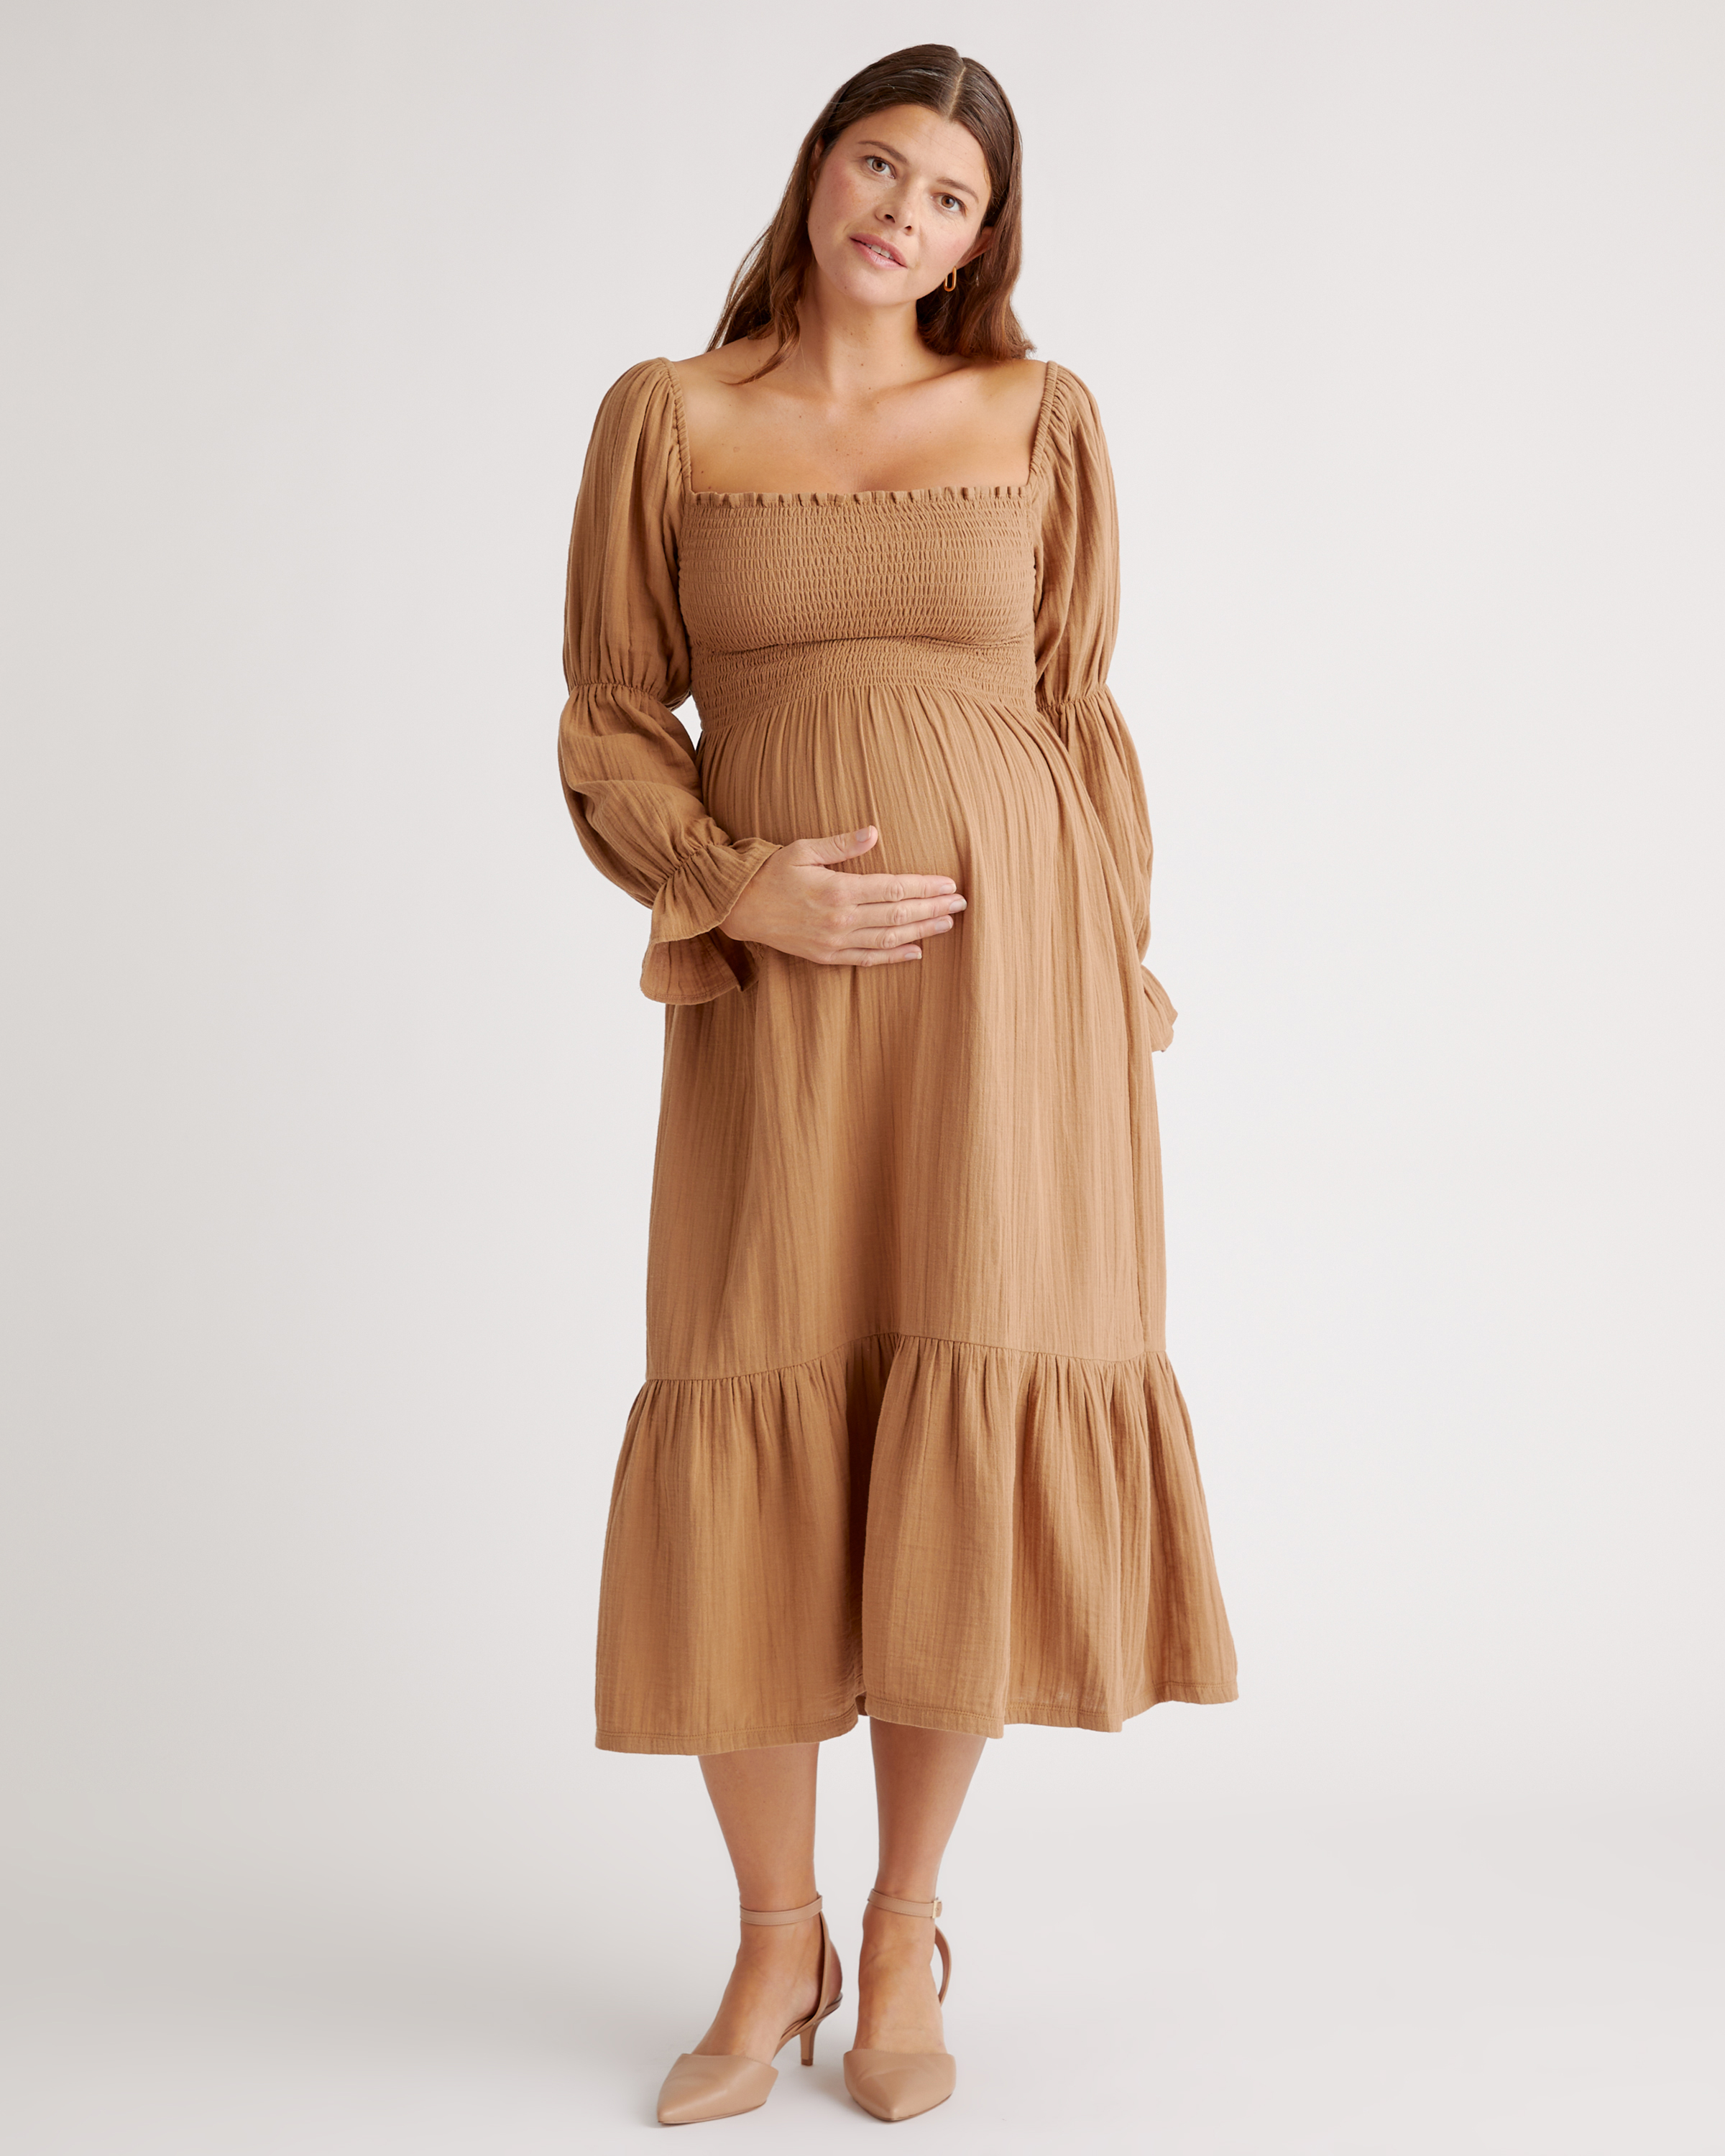 ASOS Maternity Exclusive Support Shapewear Dress For The Perfect Bump